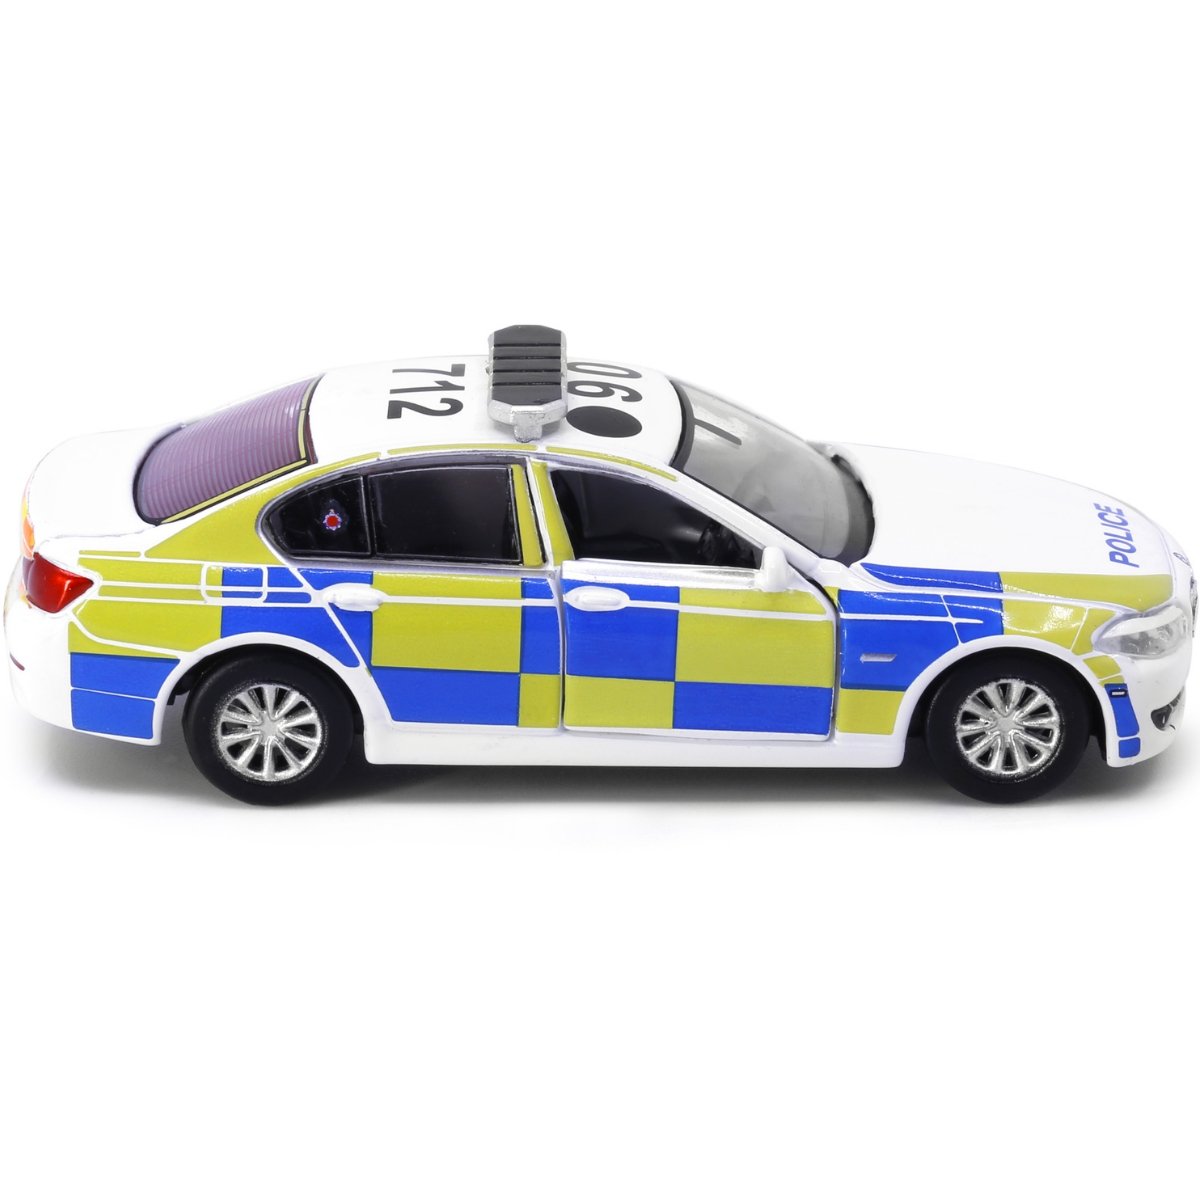 Tiny Models UK7 BMW 5 Series F10 - Greater Manchester Police (1:64 Scale) - Phillips Hobbies